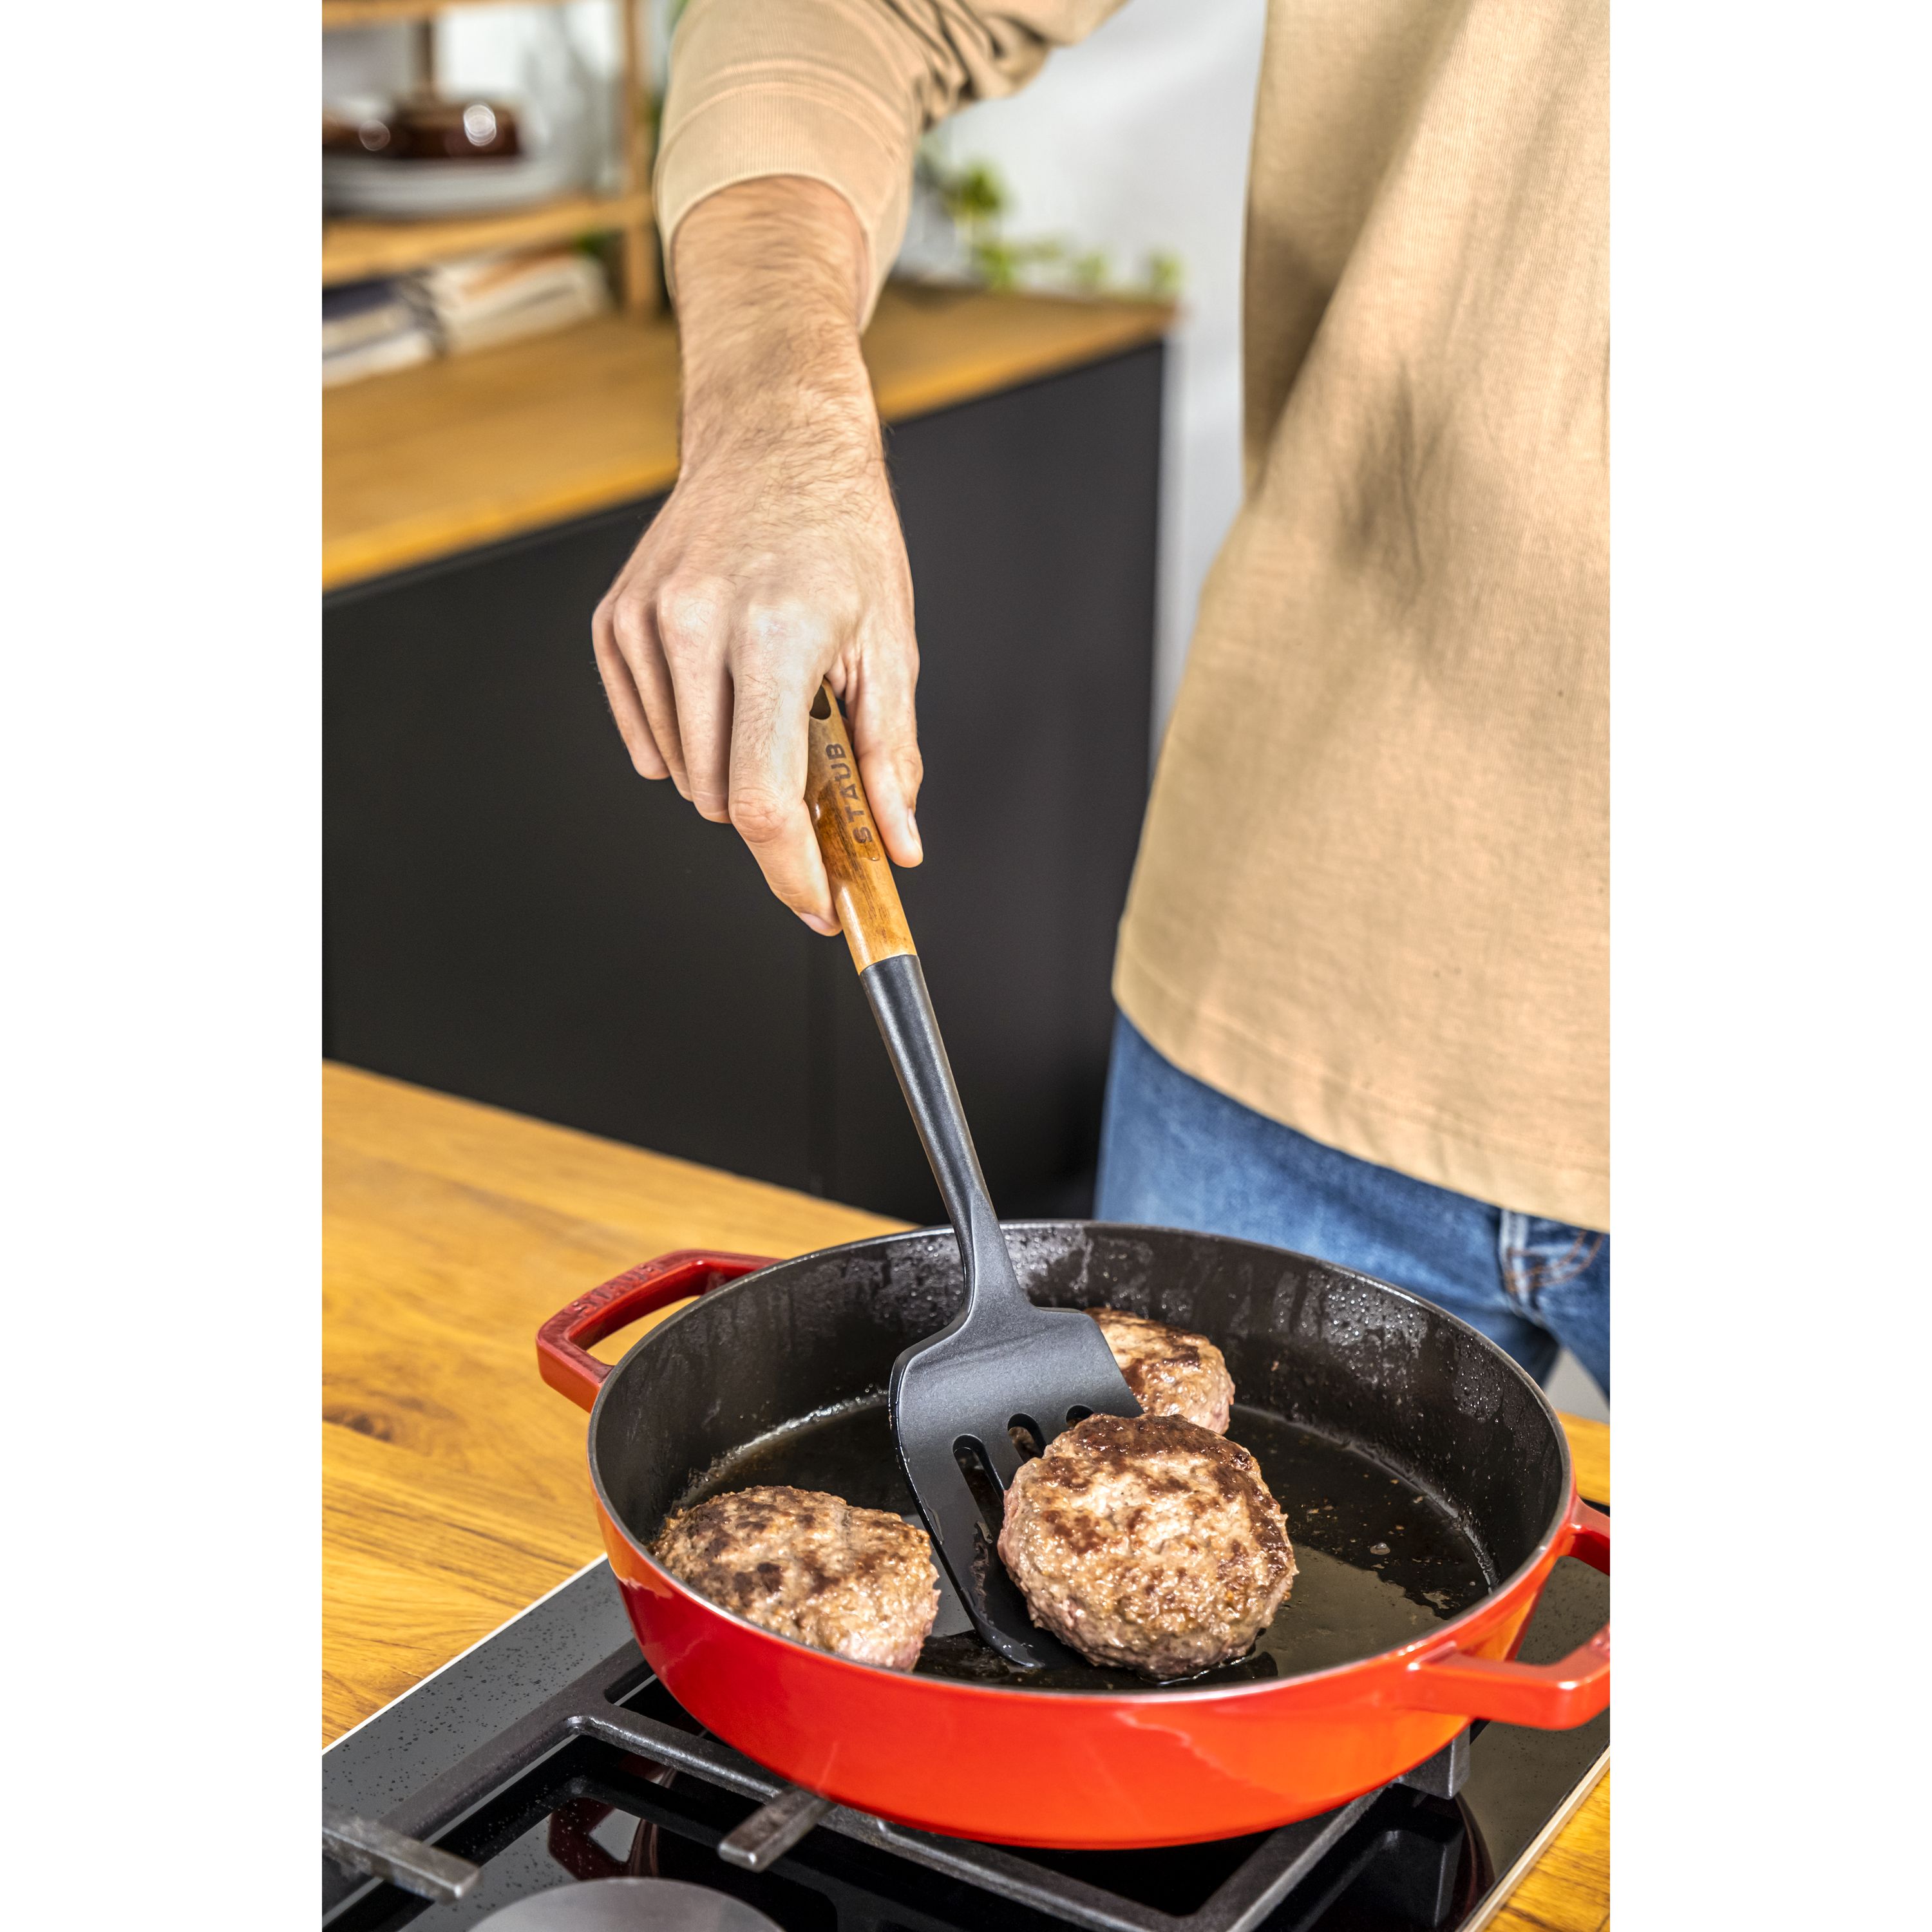 Staub Silicone with Wood Handle 3 Piece Cooking Utensil Set & Reviews